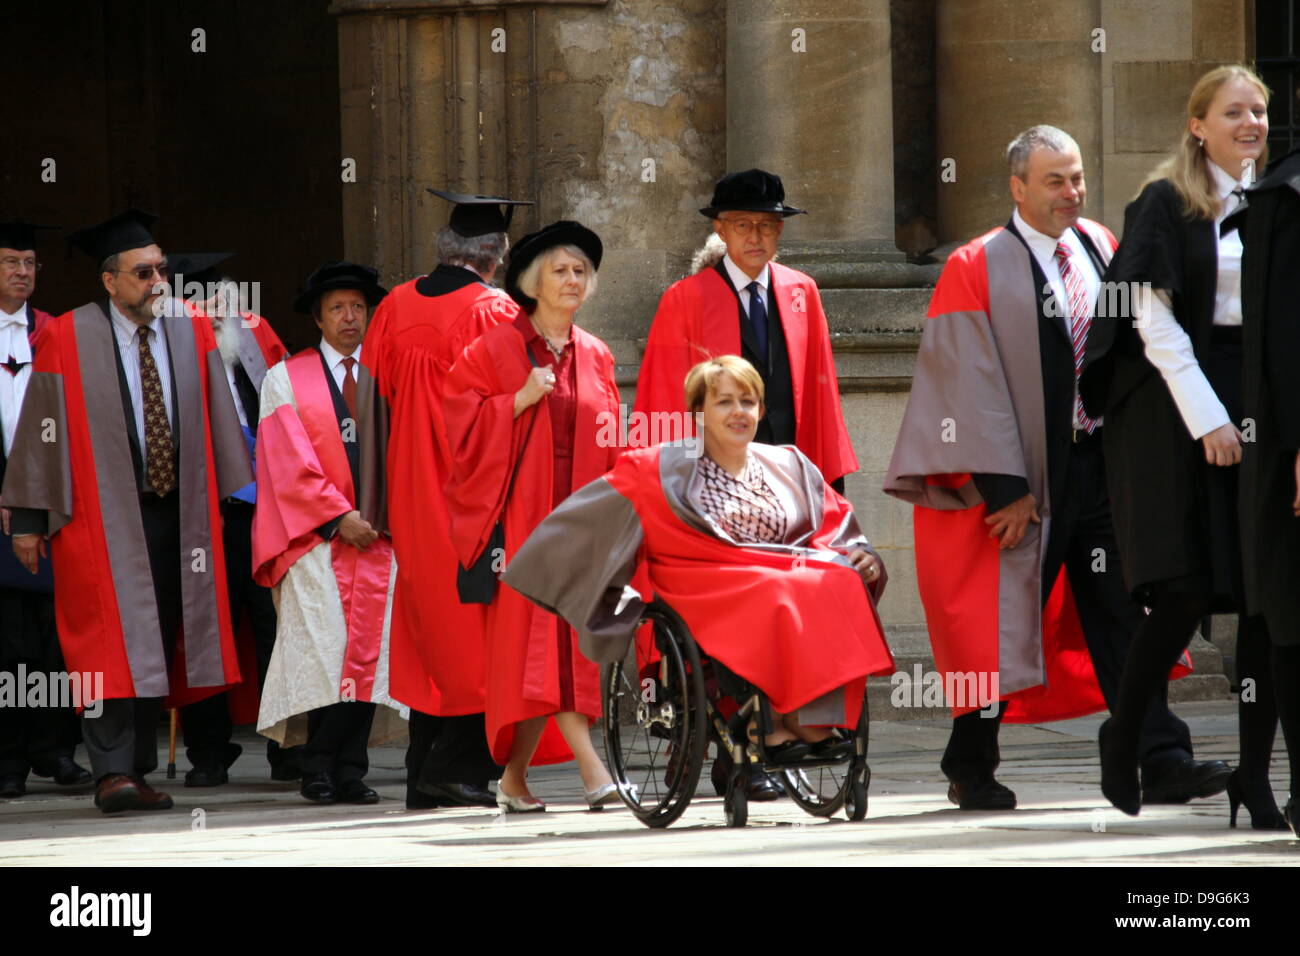 Oxford, UK. 19th June 2013. Tanni Grey-Thompson in procession with other honorands to receive  Honorary Degree at Oxford University today. Credit:  petericardo lusabia/Alamy Live News Stock Photo